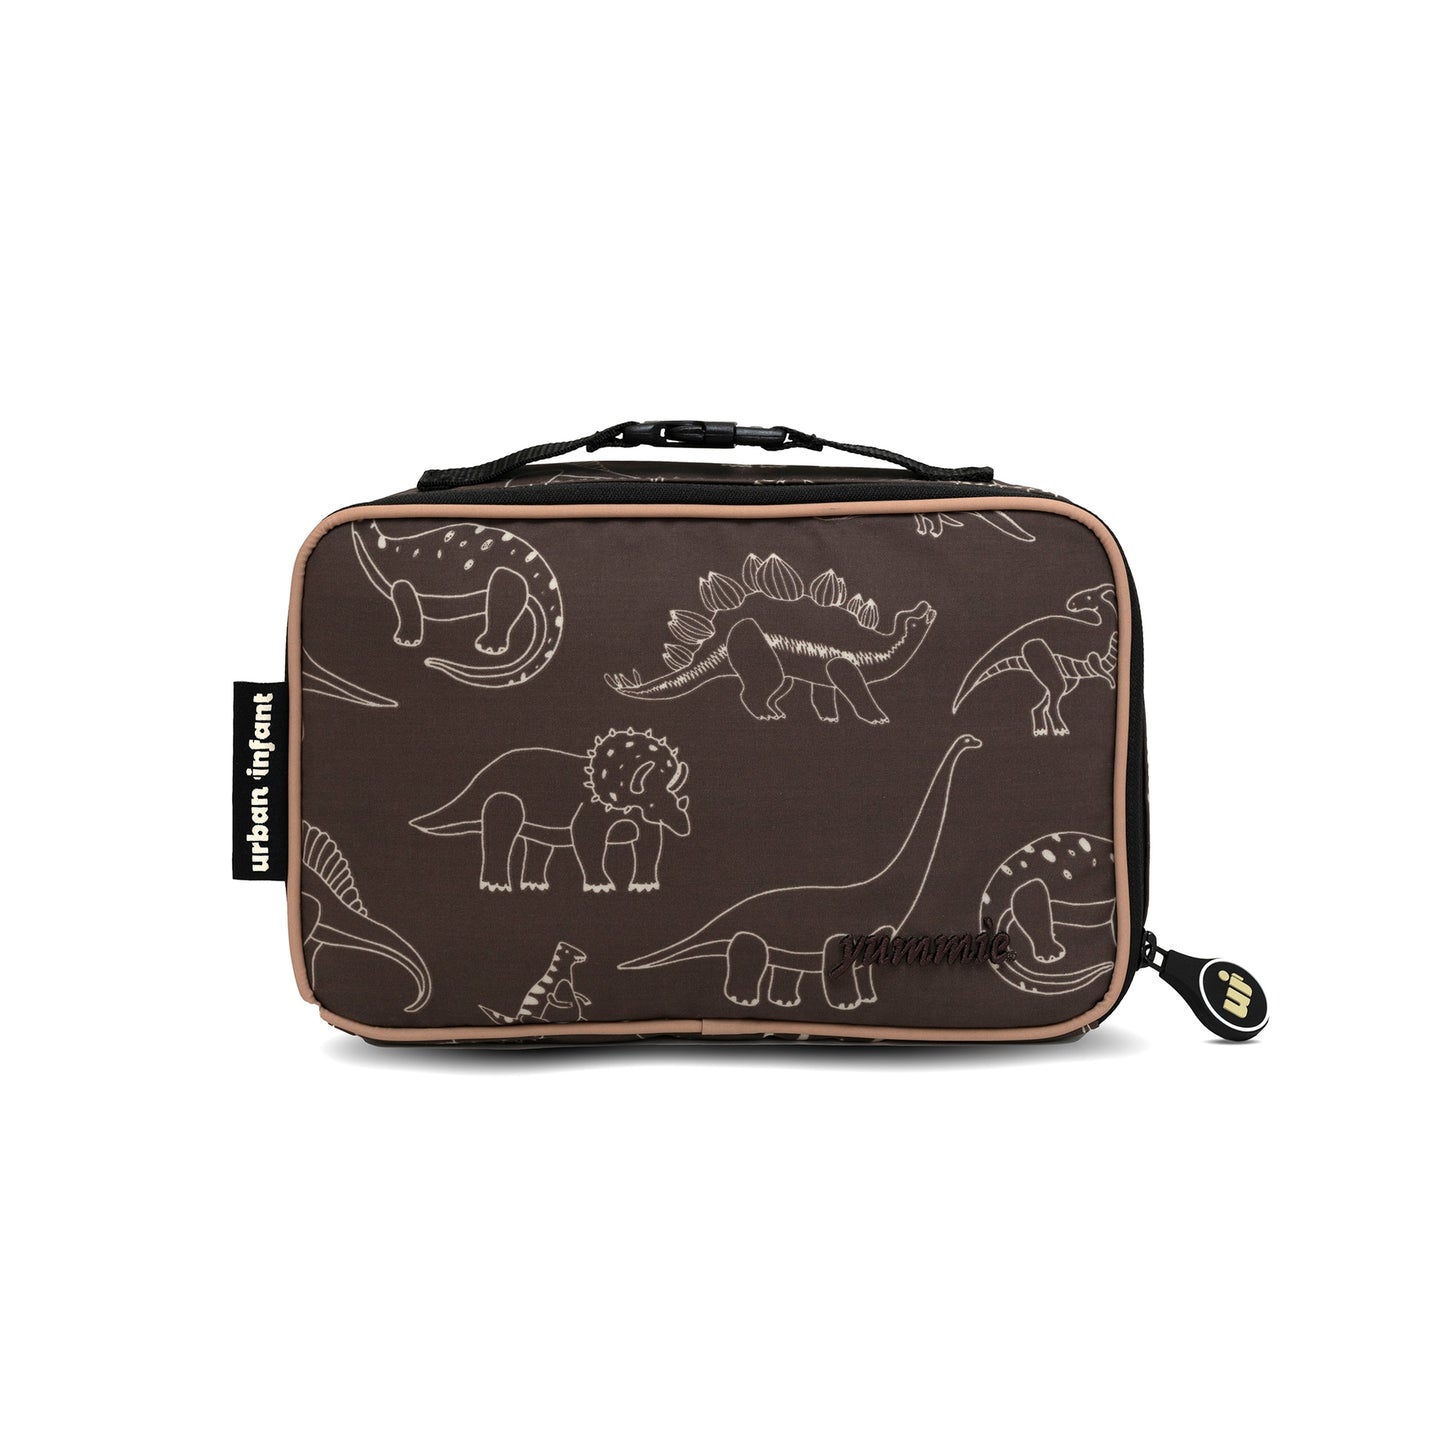 Urban Infant Yummie Toddler Lunch Bag - Dinosaurs